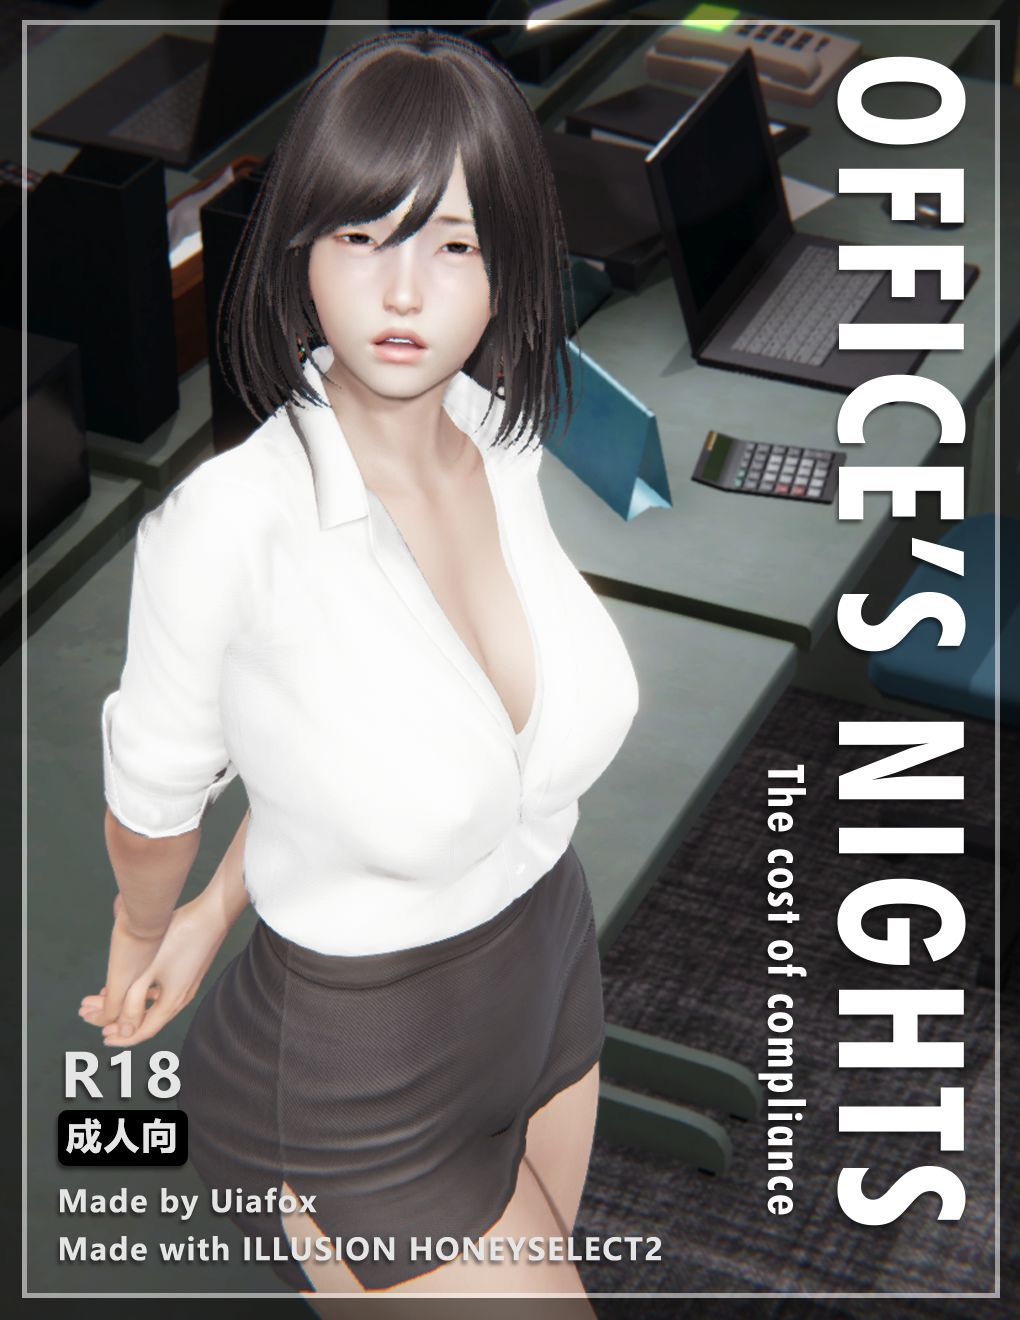 OFFICE'S NIGHTS - The cost of compliance 1